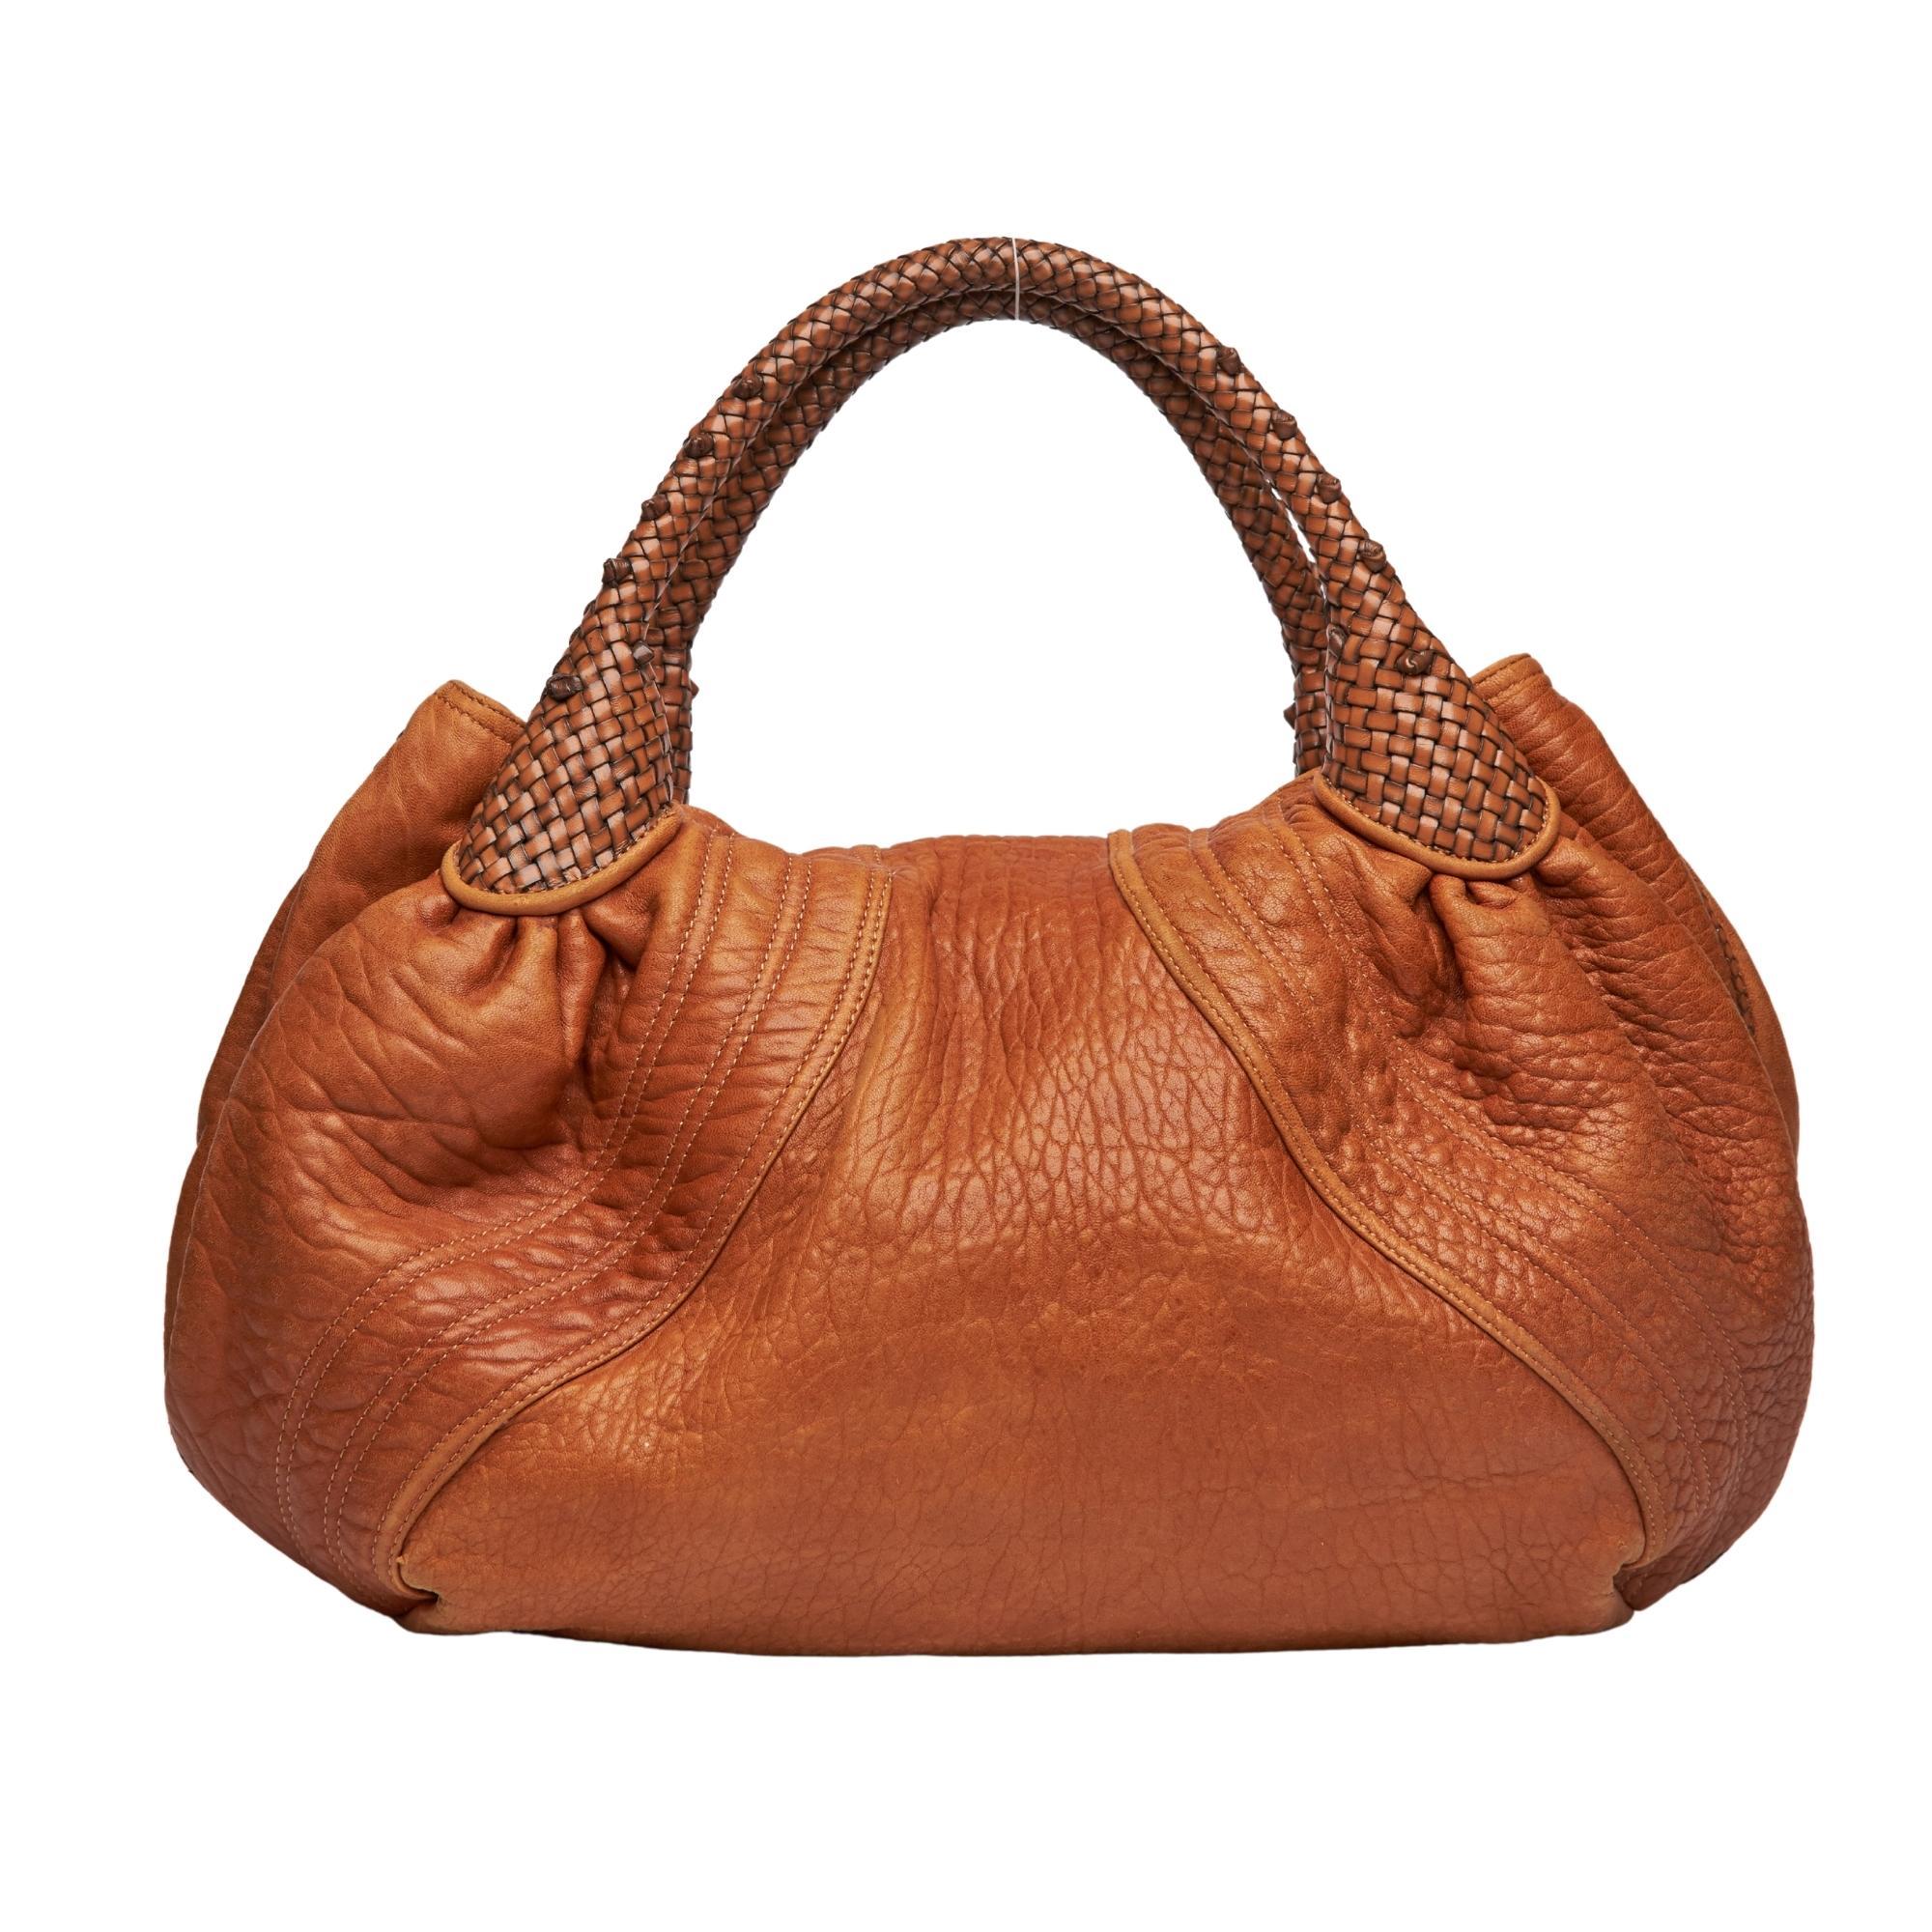 
This signature hobo bag by Fendi is made of rich textured golden brown nappa leather and features a fold over flap with signature wristlet accent, woven handles, gold tone hardware & zucca fabric interior lining. Featuring two secret compartments,